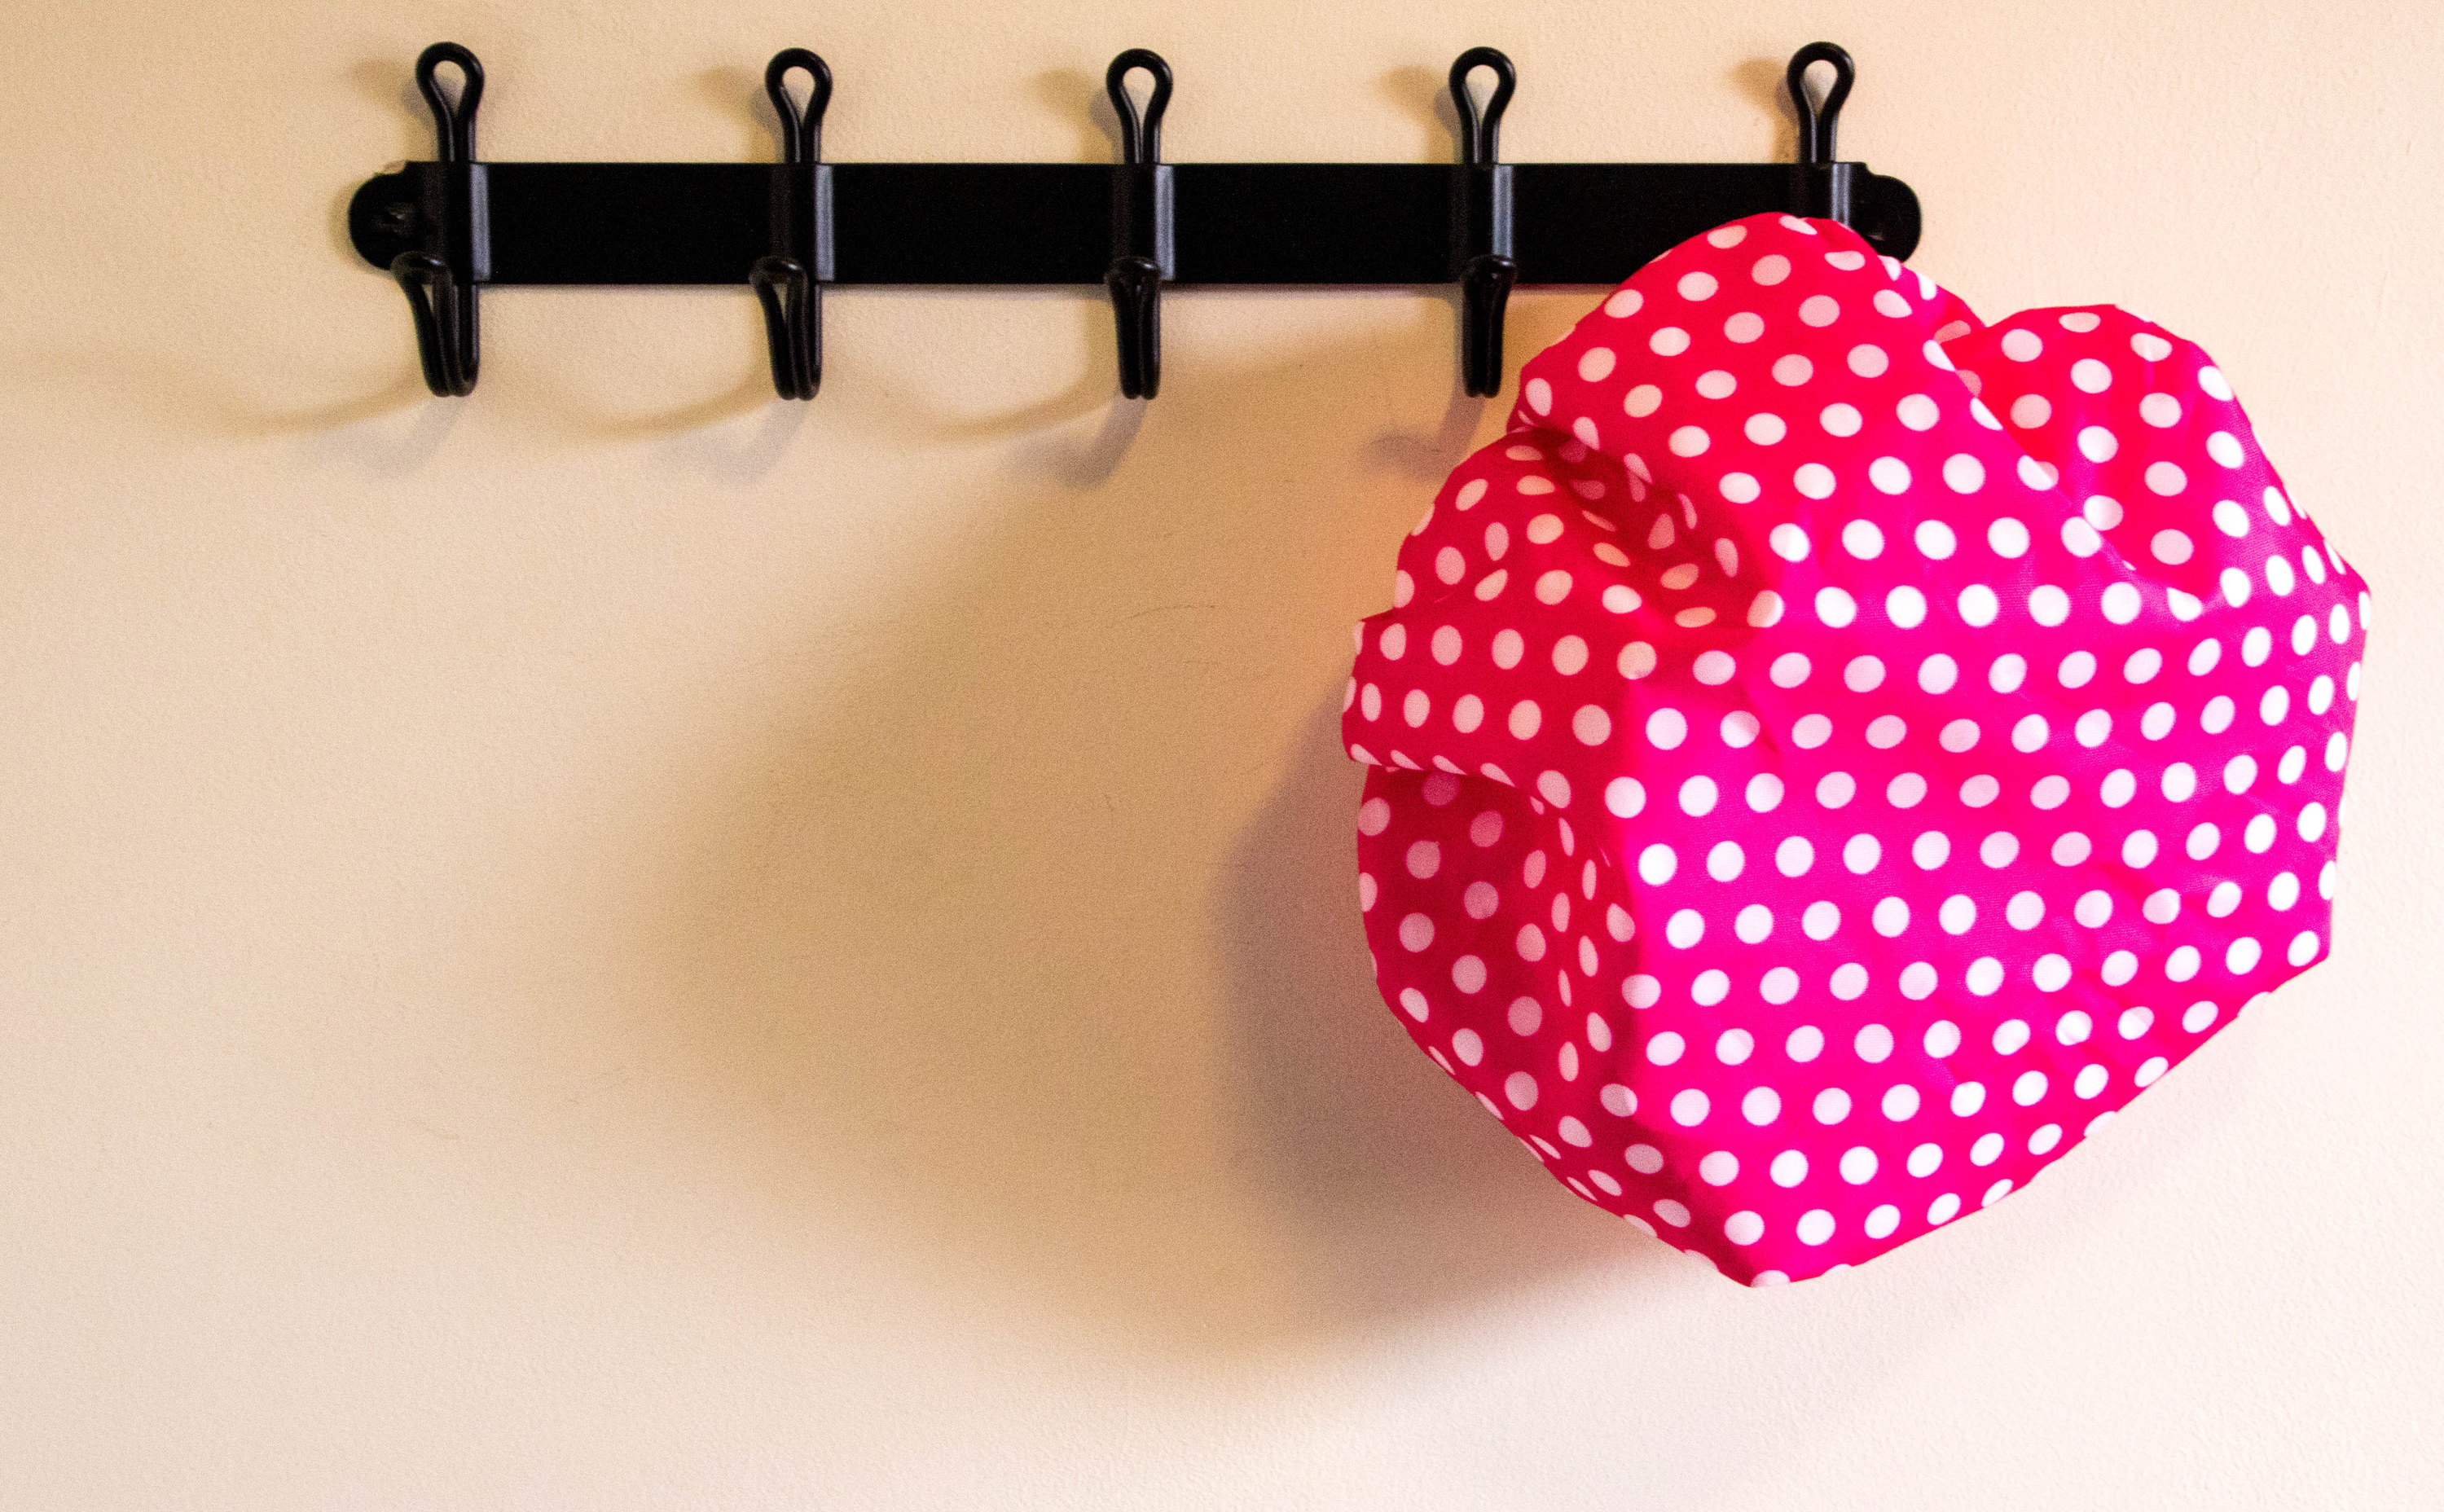 A pink and white polka dot shower cap hanging on a black hook